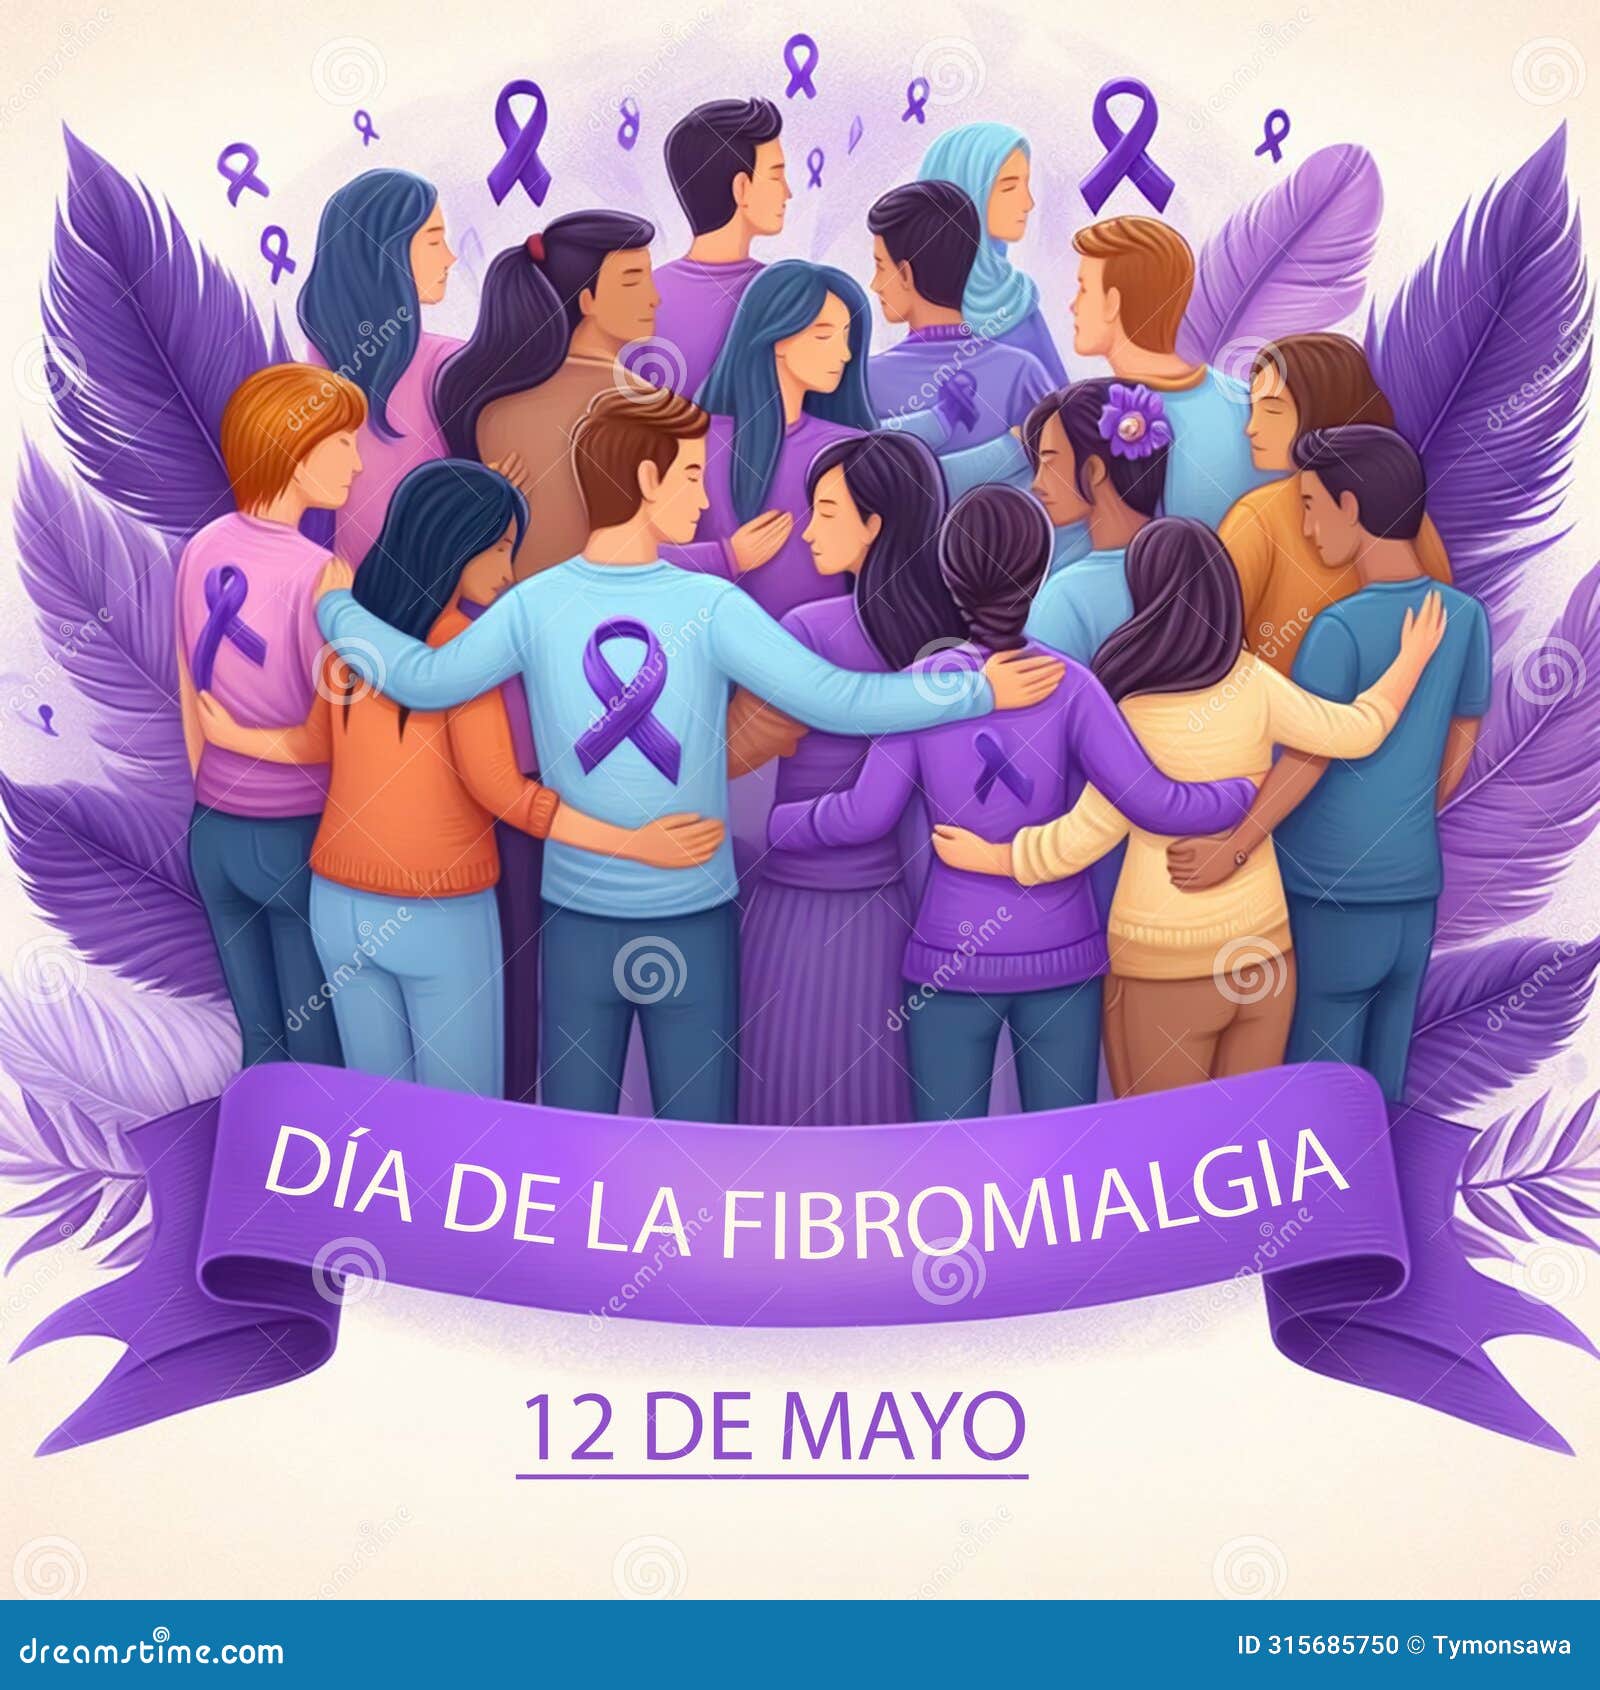 fibromyalgia day in spanish may 12. embraced people with purple ribbons